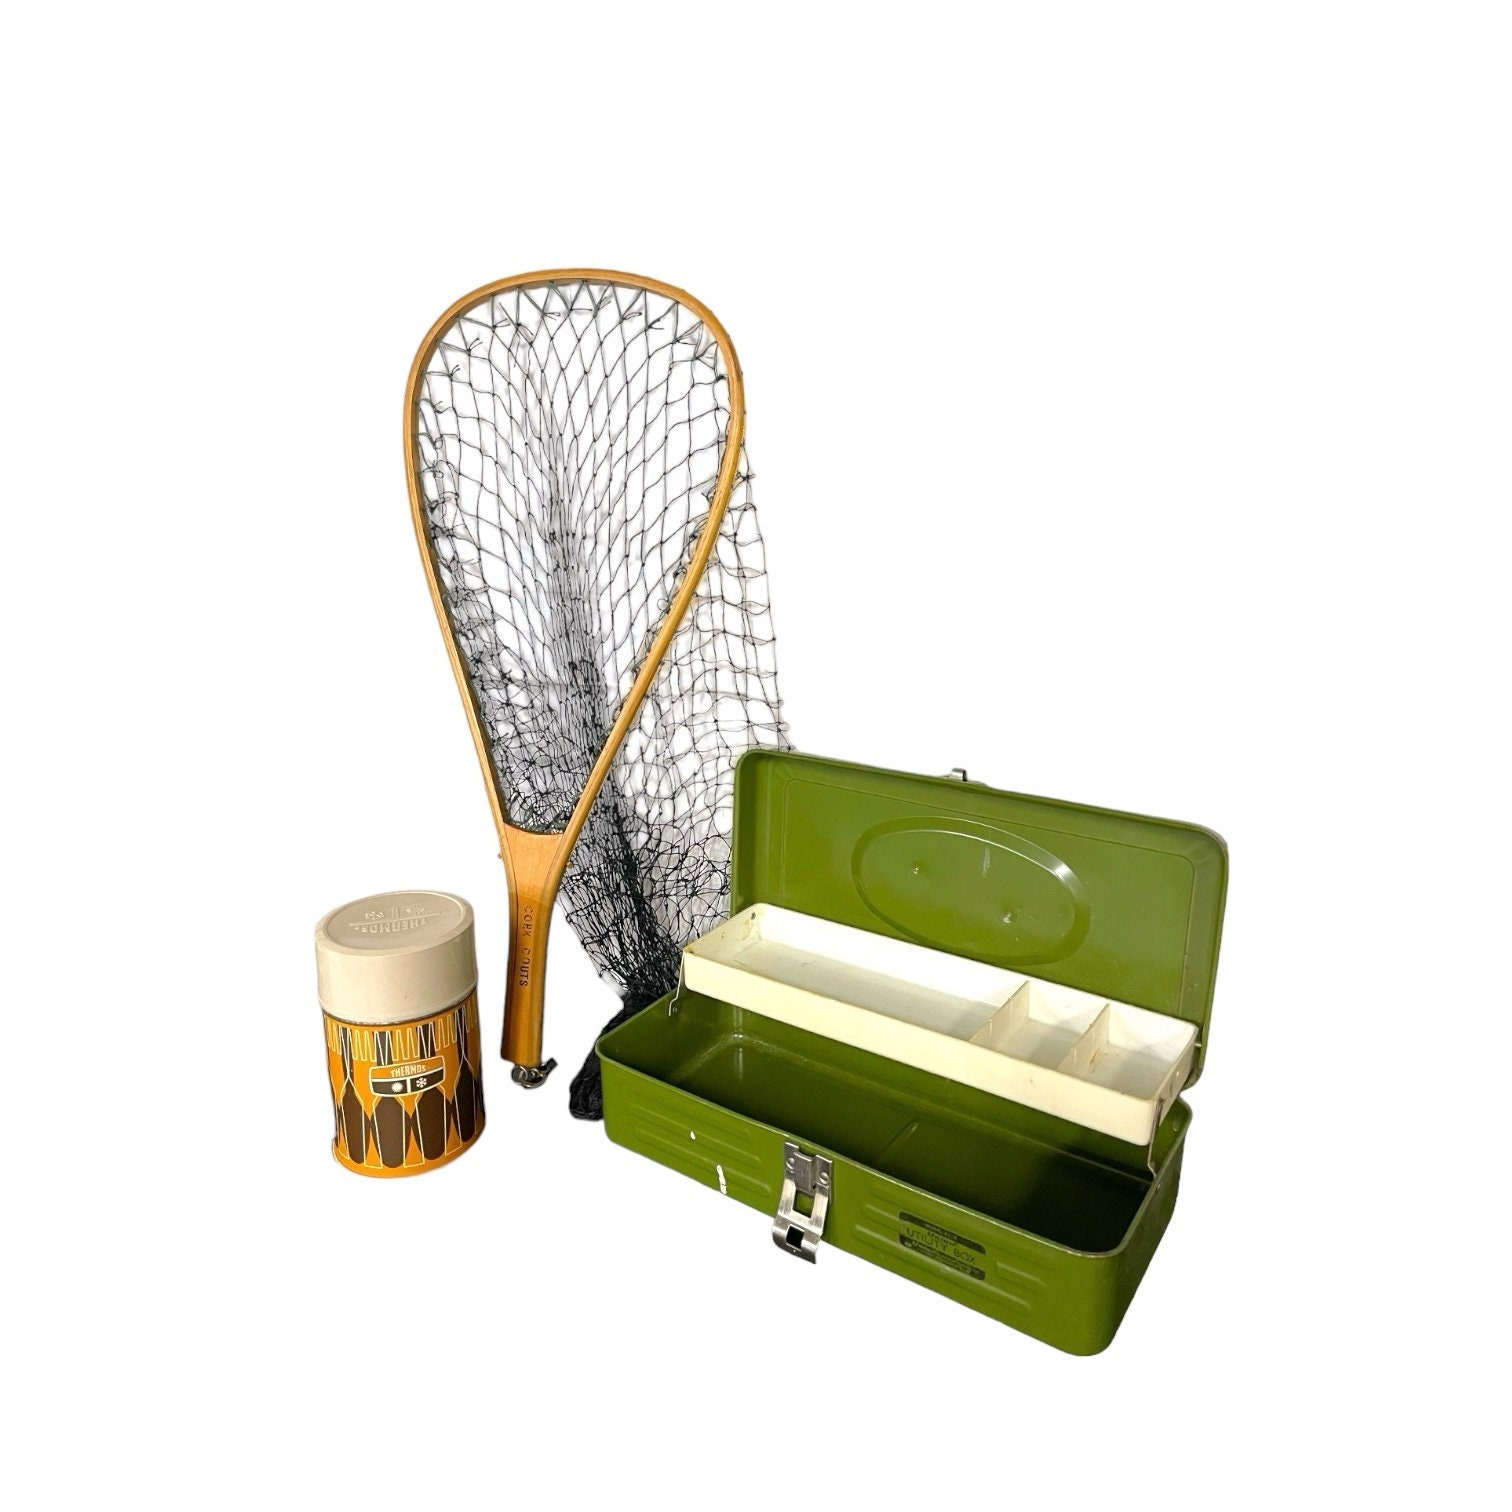 Vintage Fishing Gear Set, Fish Net, Olive Green Tackle Box by